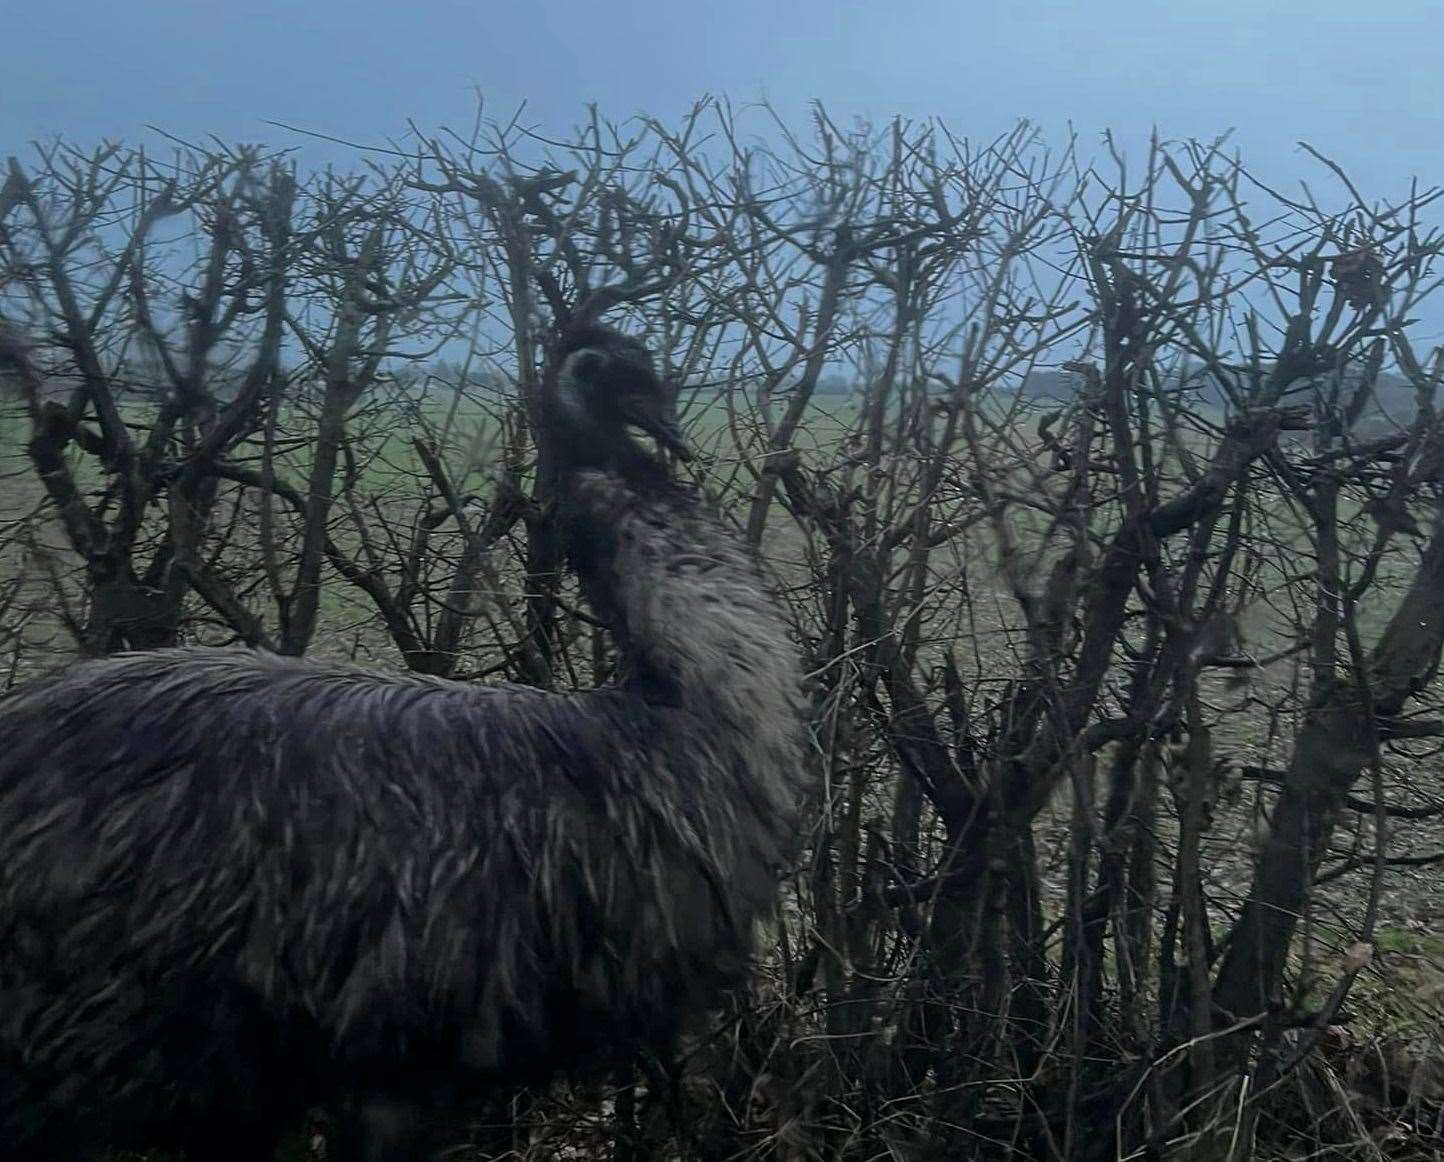 Duggie the emu escaped Happy Pants Ranch in January